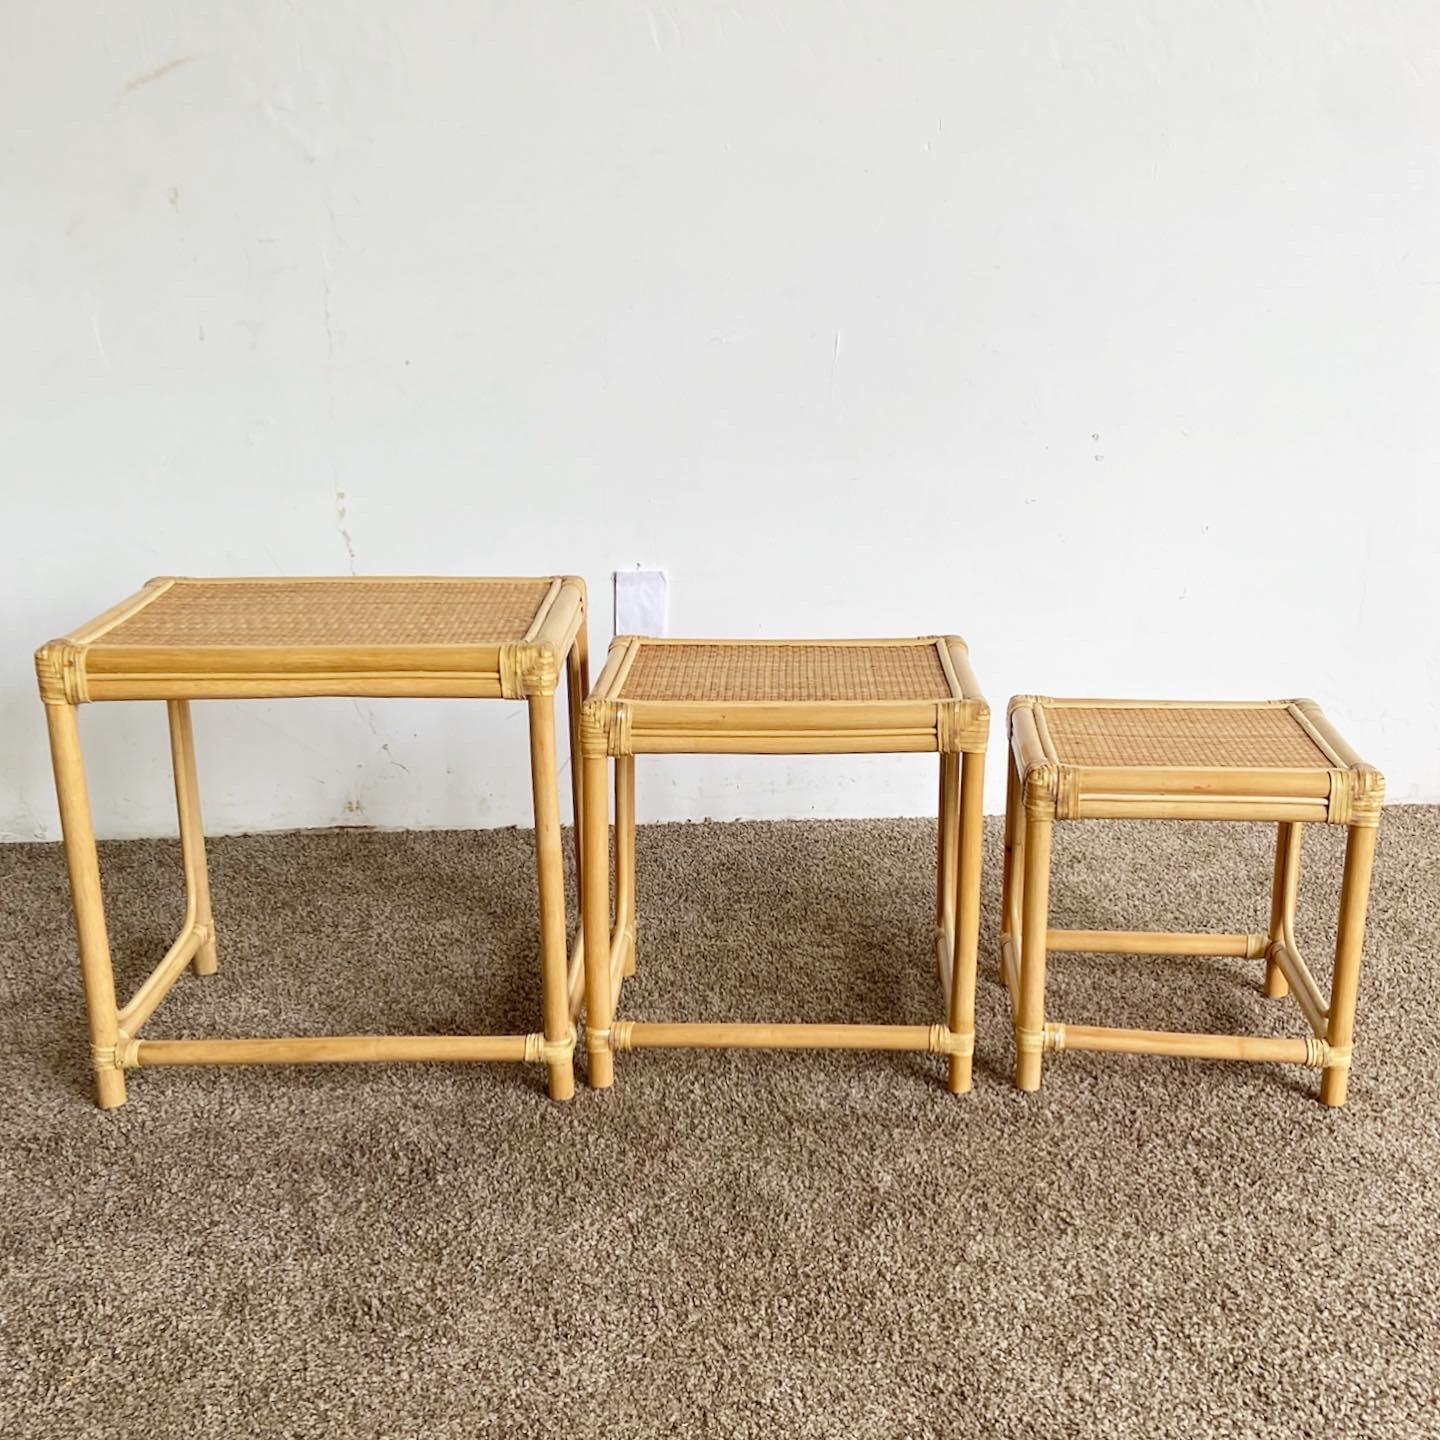 Late 20th Century Boho Chic Bamboo Rattan and Wicker Nesting Tables, Set of 3 For Sale